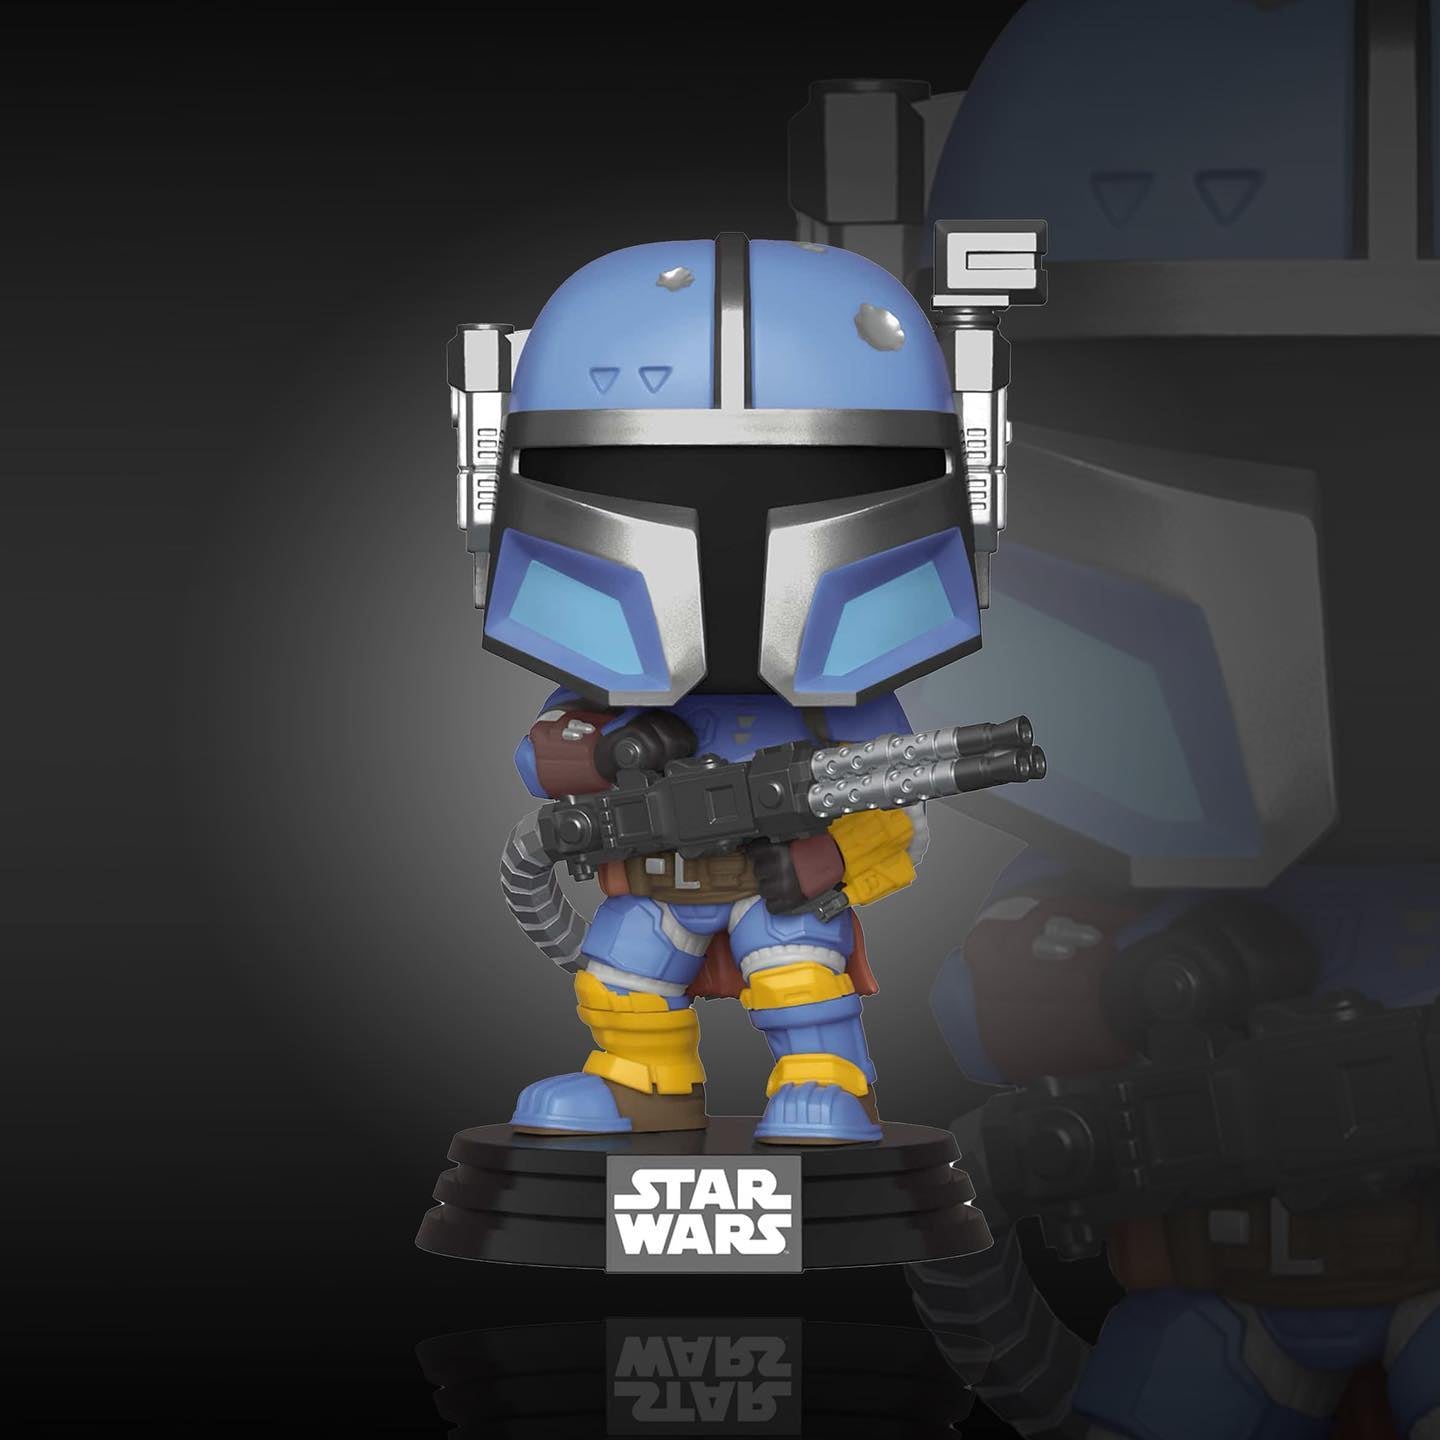 Joining the Funko Pop! galaxy...